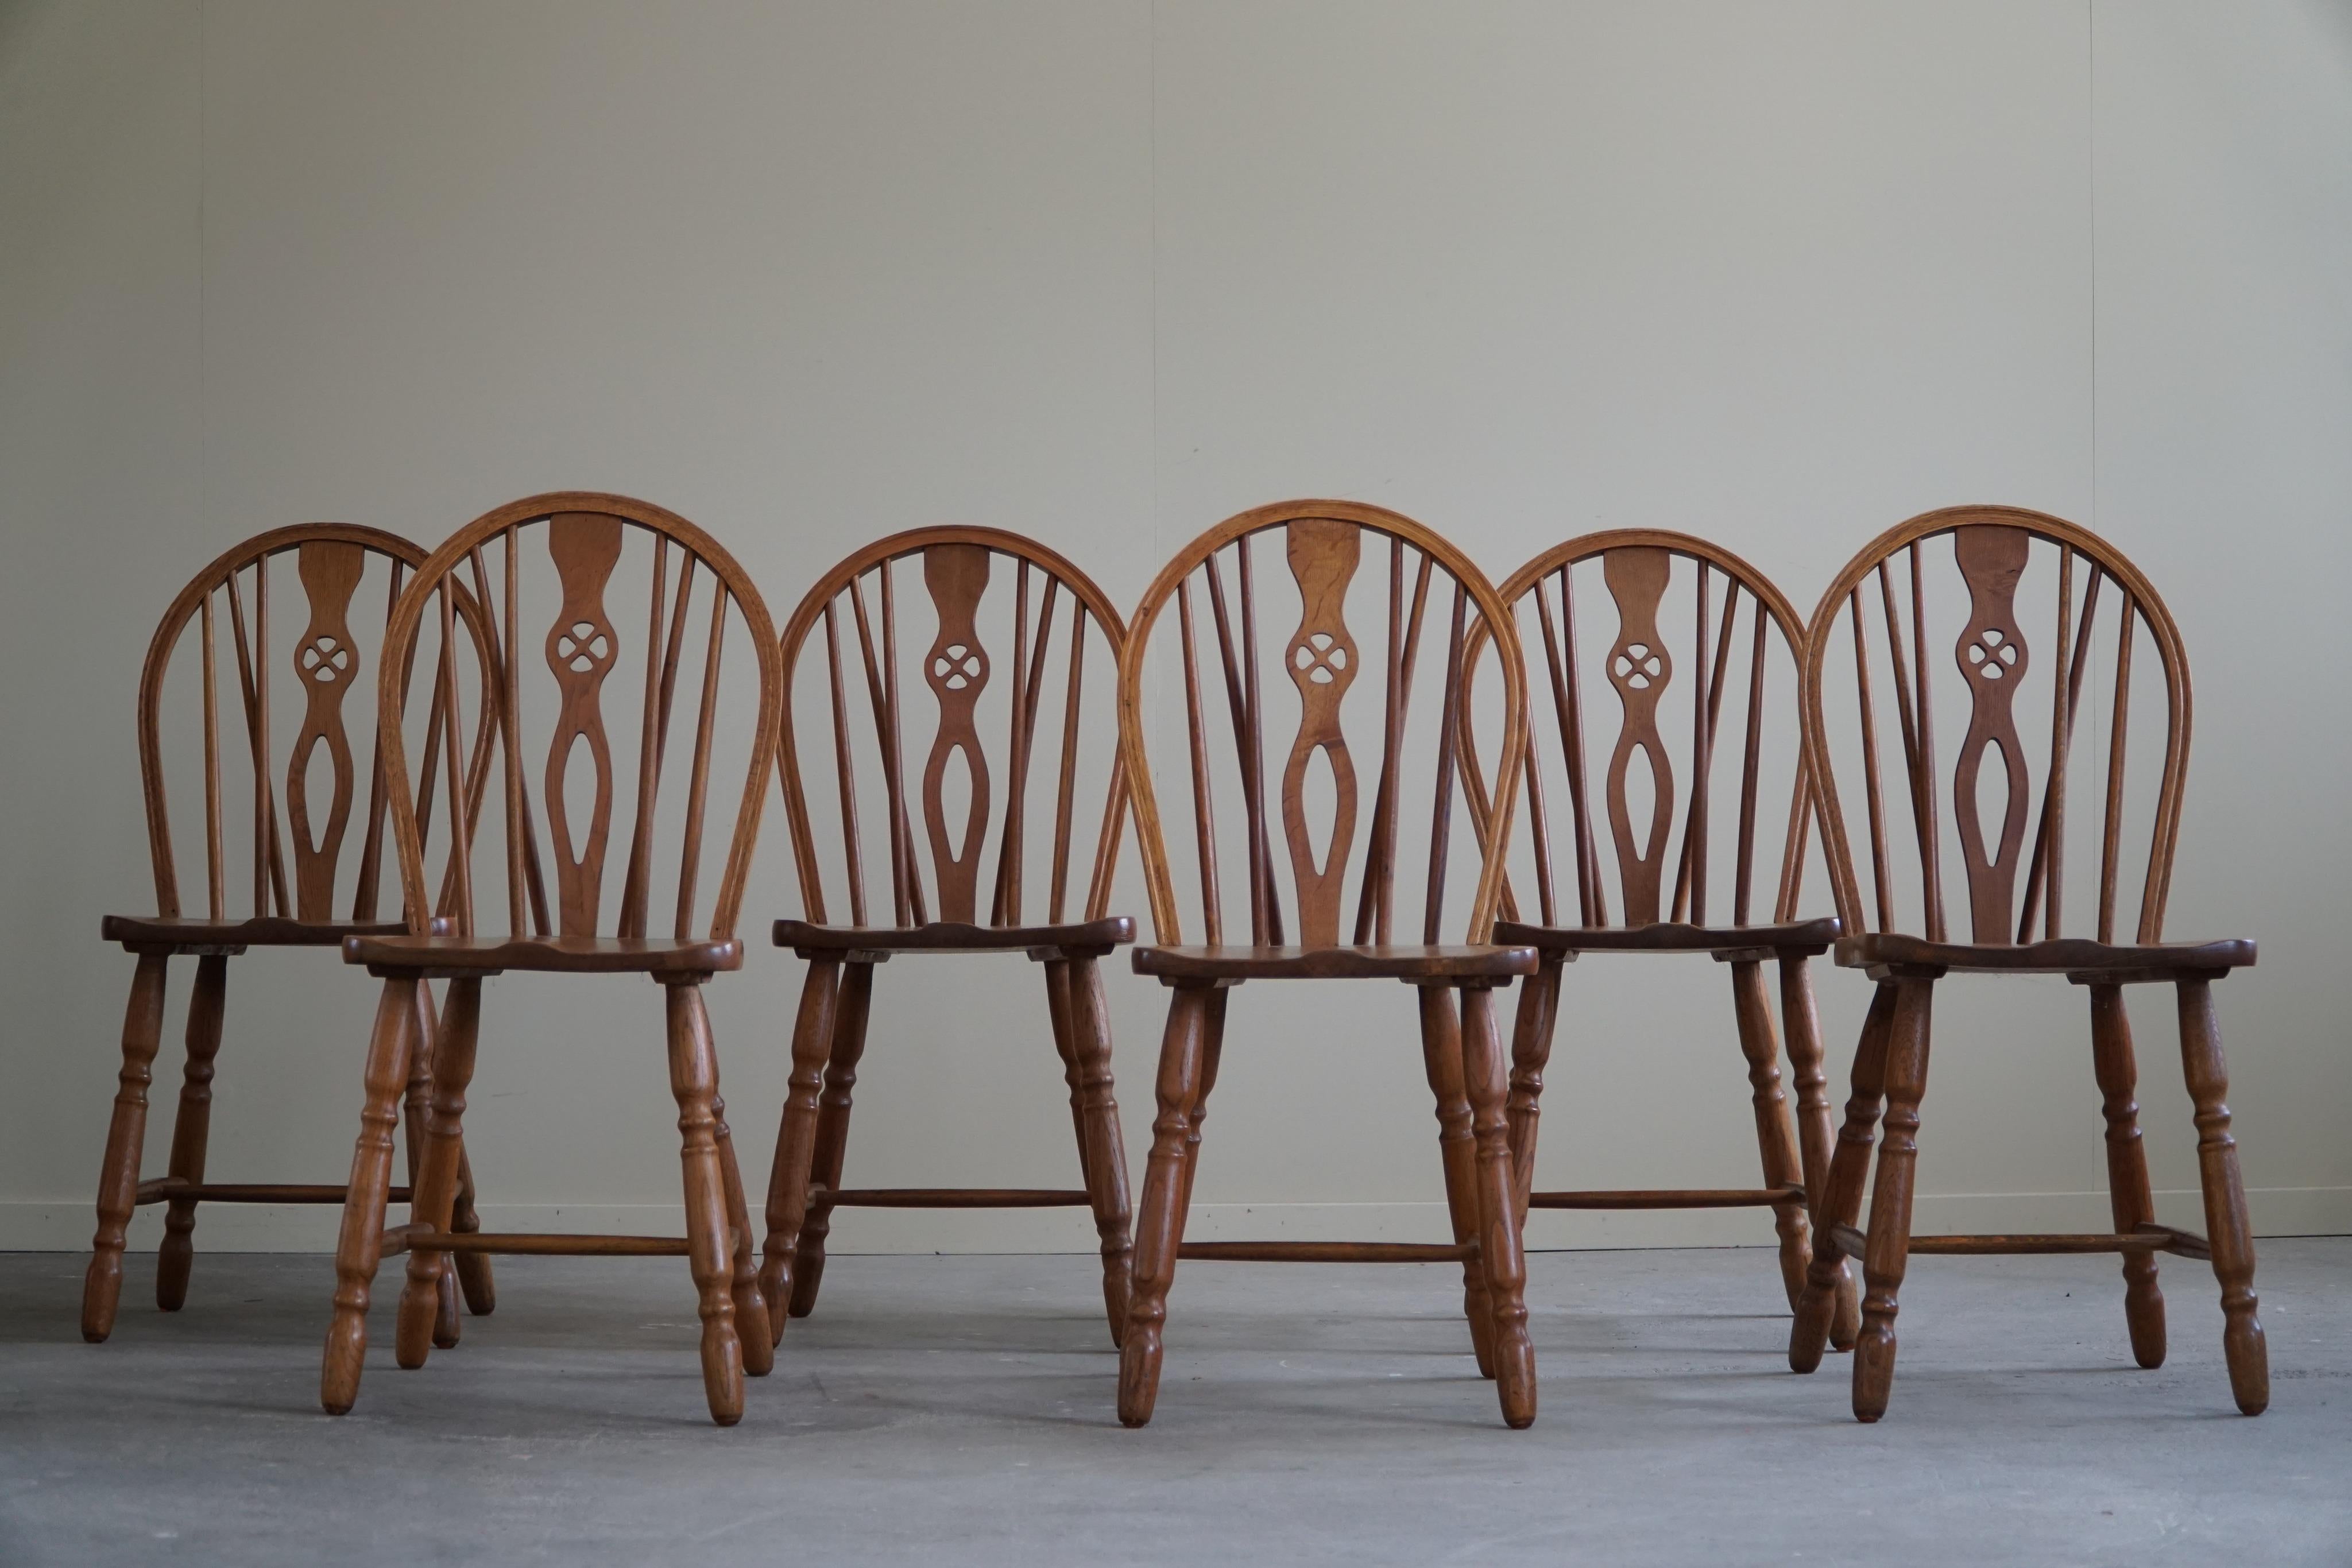 Set of 6 Windsor Dining Room Chairs in Oak, English Edwardian, 19th Century For Sale 17